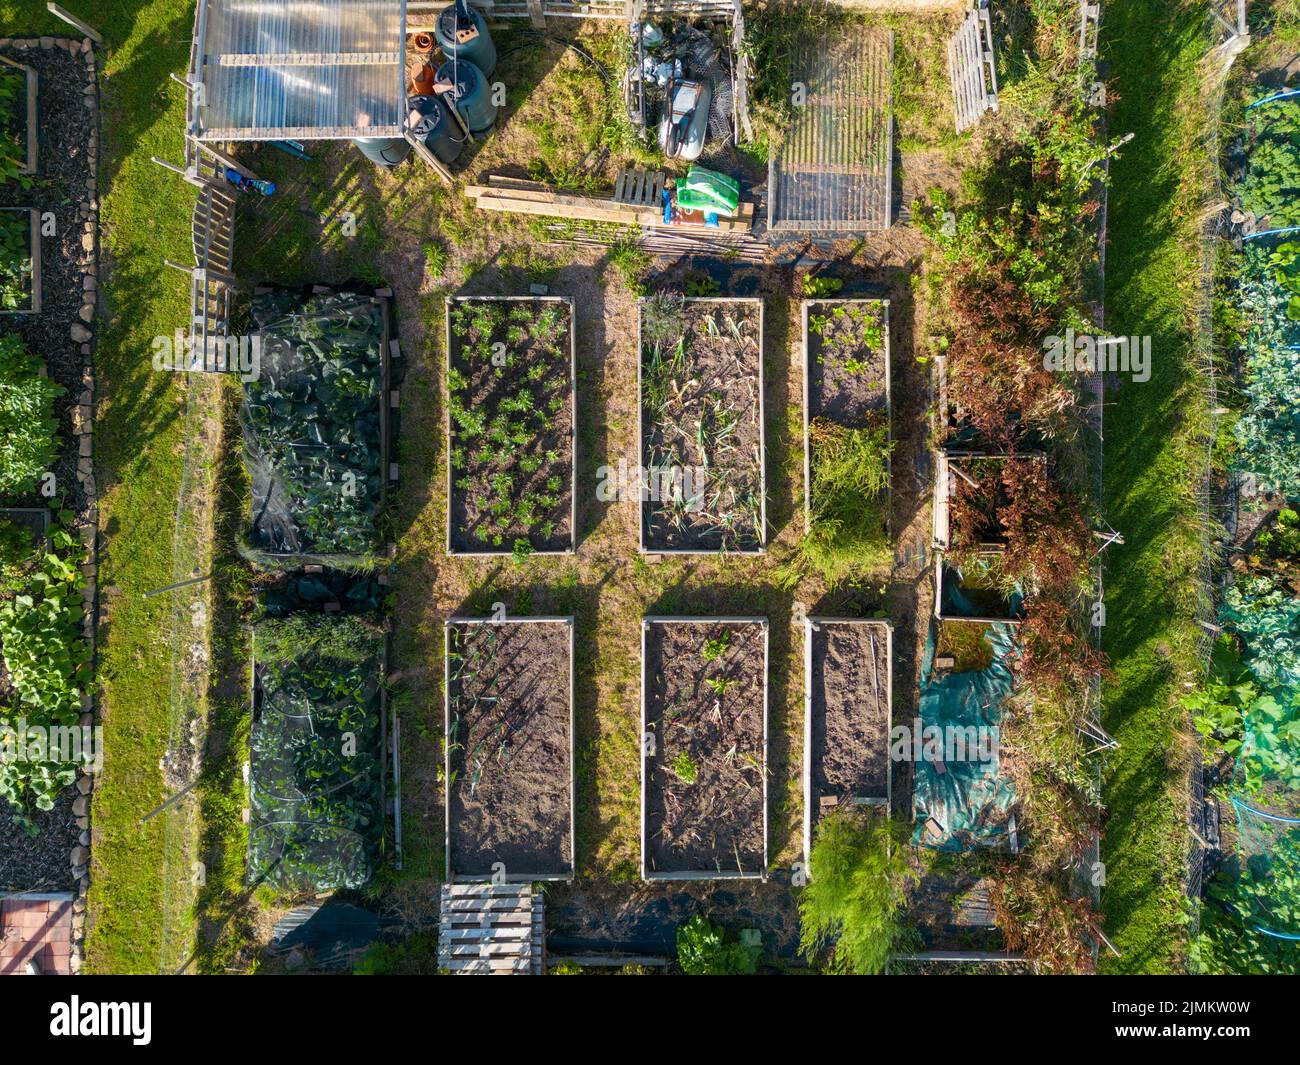 Leeds, UK. 7th August, 2022. UK Weather - Bright sunny weather in Eccup, Leeds, with allotments soaking up the sunshine. Dry conditions remain a concern for gardeners tending to flowers and plants in vegetable gardens. Credit: Bradley Taylor / Alamy News Stock Photo